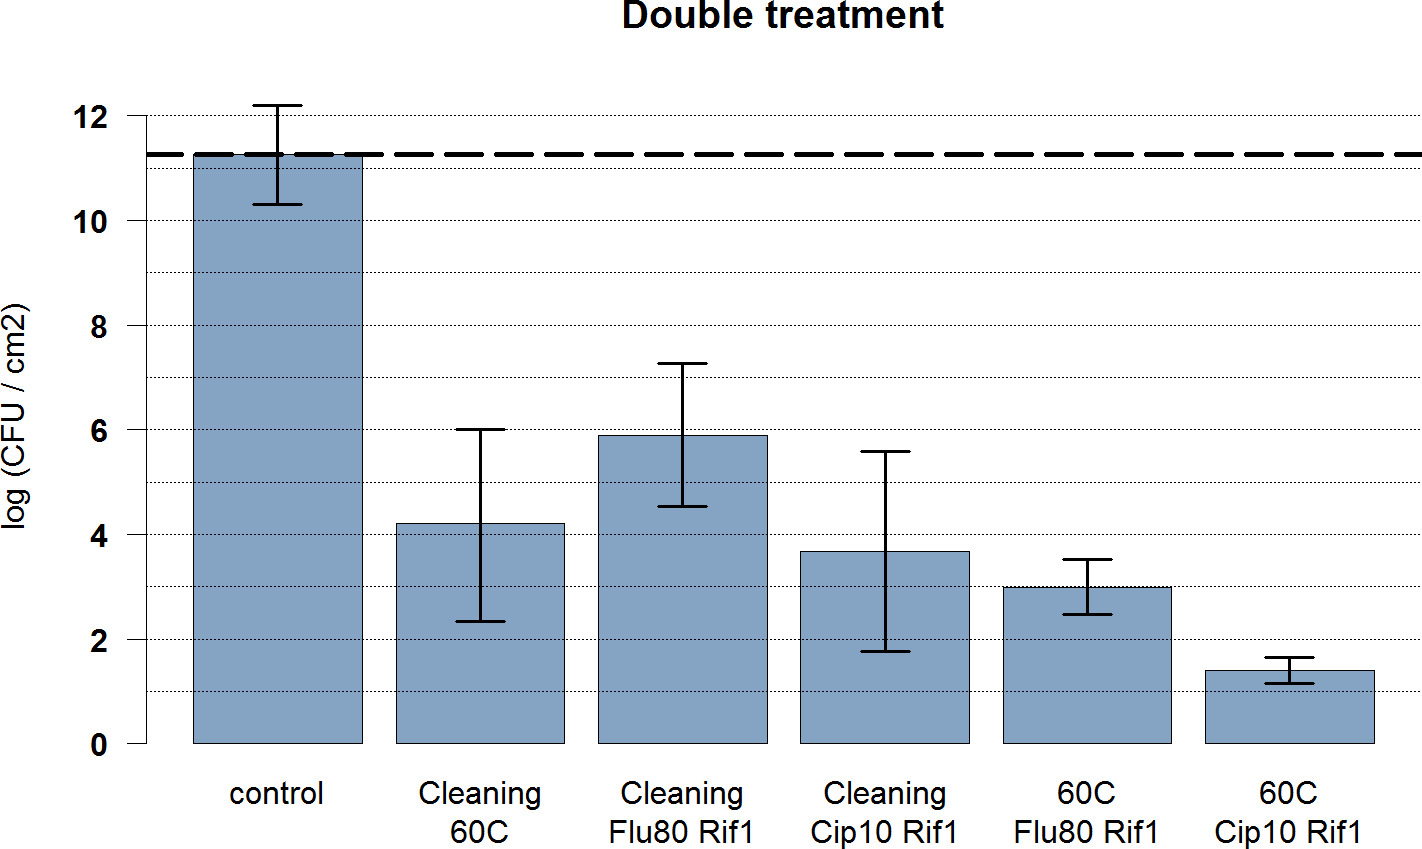 Fig. 4 
            Seven- to eight-day biofims: graph showing the log colony-forming units (CFUs) that remain for seven-day Staphylococcus aureus biofilms after a combination of two (double) treatments. The dashed line represents the control. Mean and 95% confidence intervals are presented. ‘Cleaning’ refers to mechanical cleaning. 60C, induction heating to 60°C for one minute; Cip10Rif1, ciprofloxacin 10 mg/l + rifampicin 1 mg/l; Flu80Rif1, flucloxacillin 80 mg/l + rifampicin 1 mg/l.
          